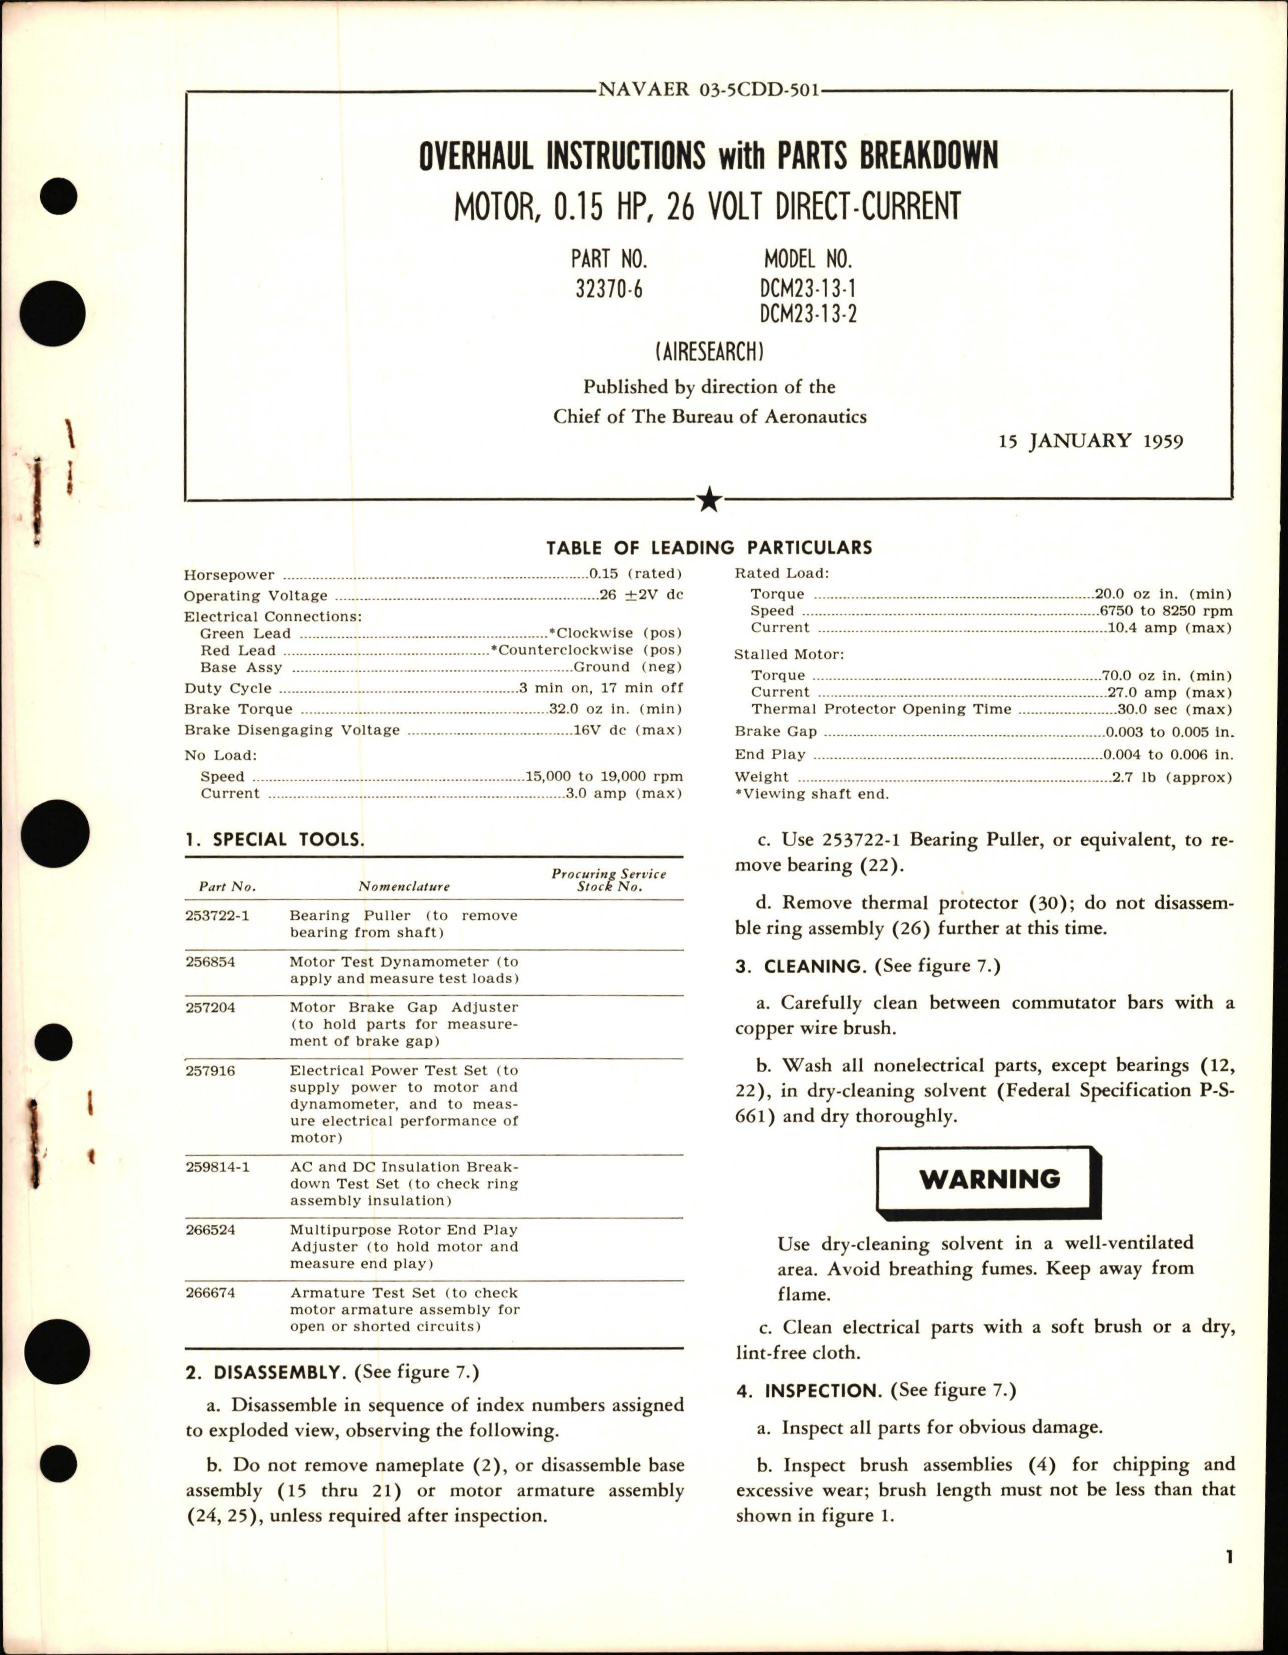 Sample page 1 from AirCorps Library document: Overhaul Instructions with Parts Breakdown for Motor, 0.15 HP, 26 Volt Direct Current - Part 32370-6